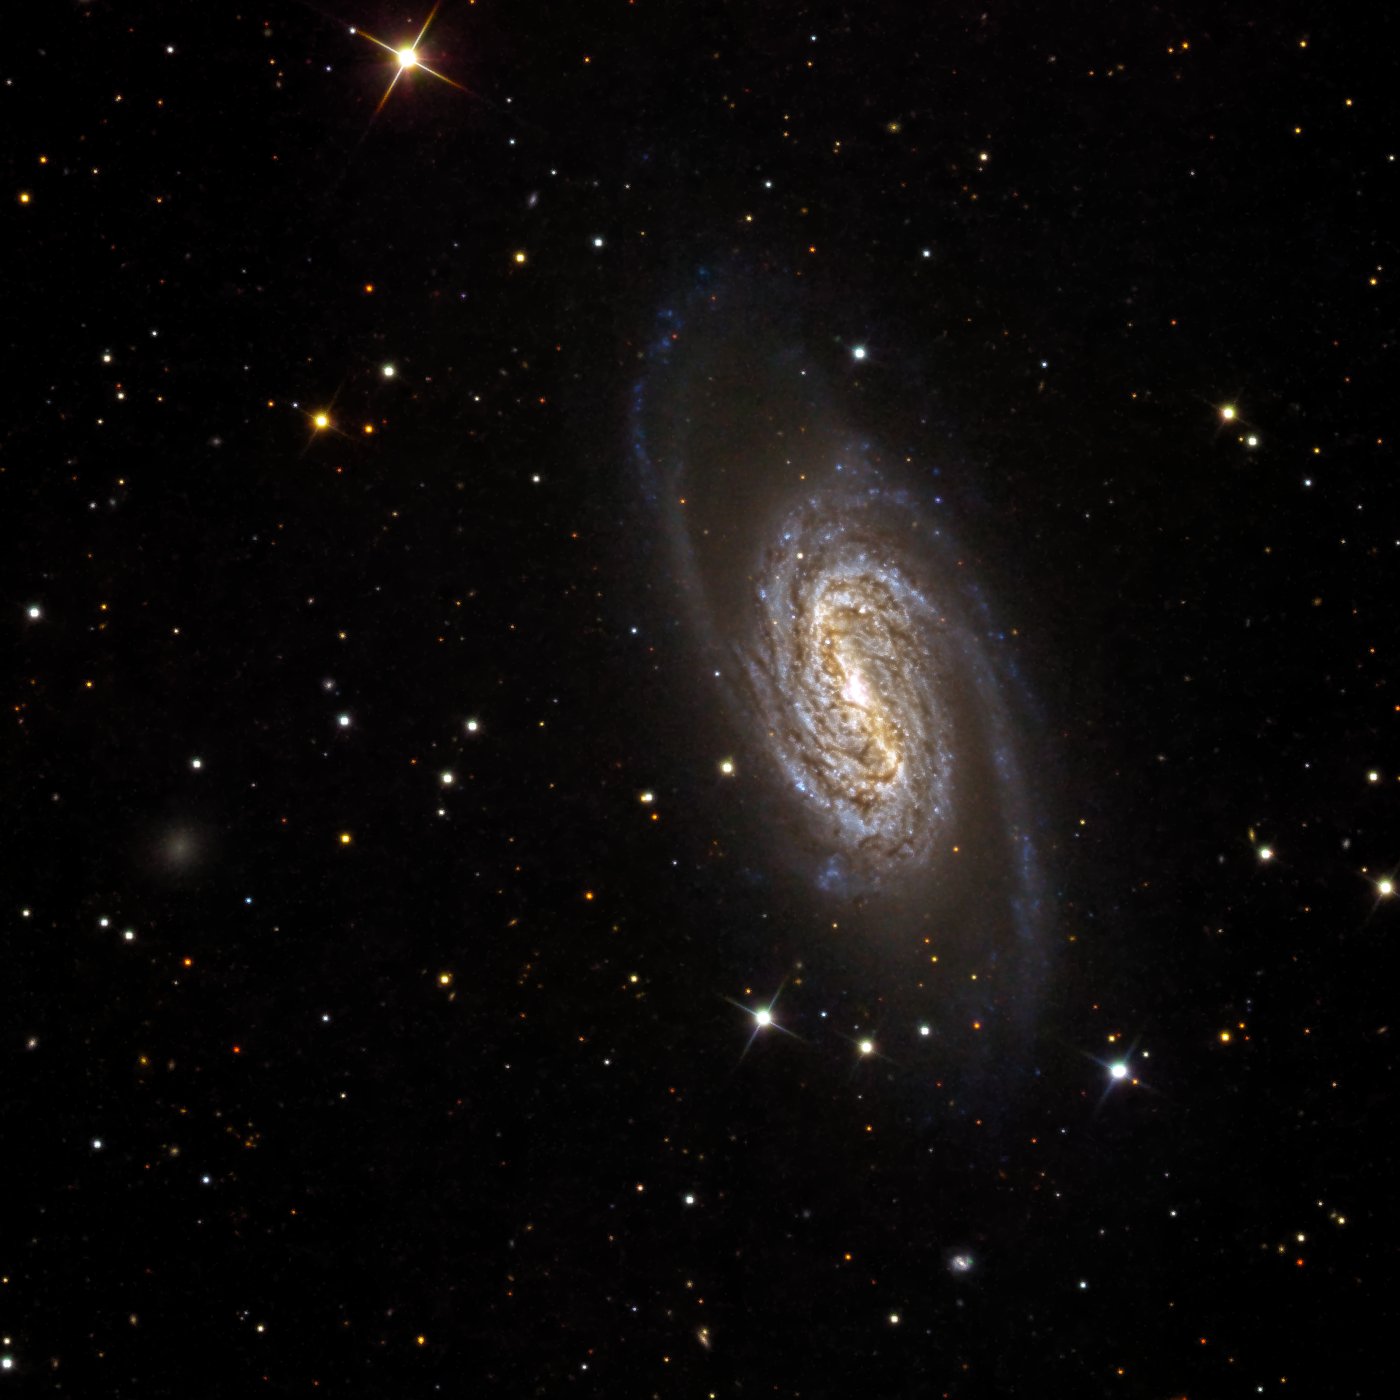 NGC 2903 in continuum light